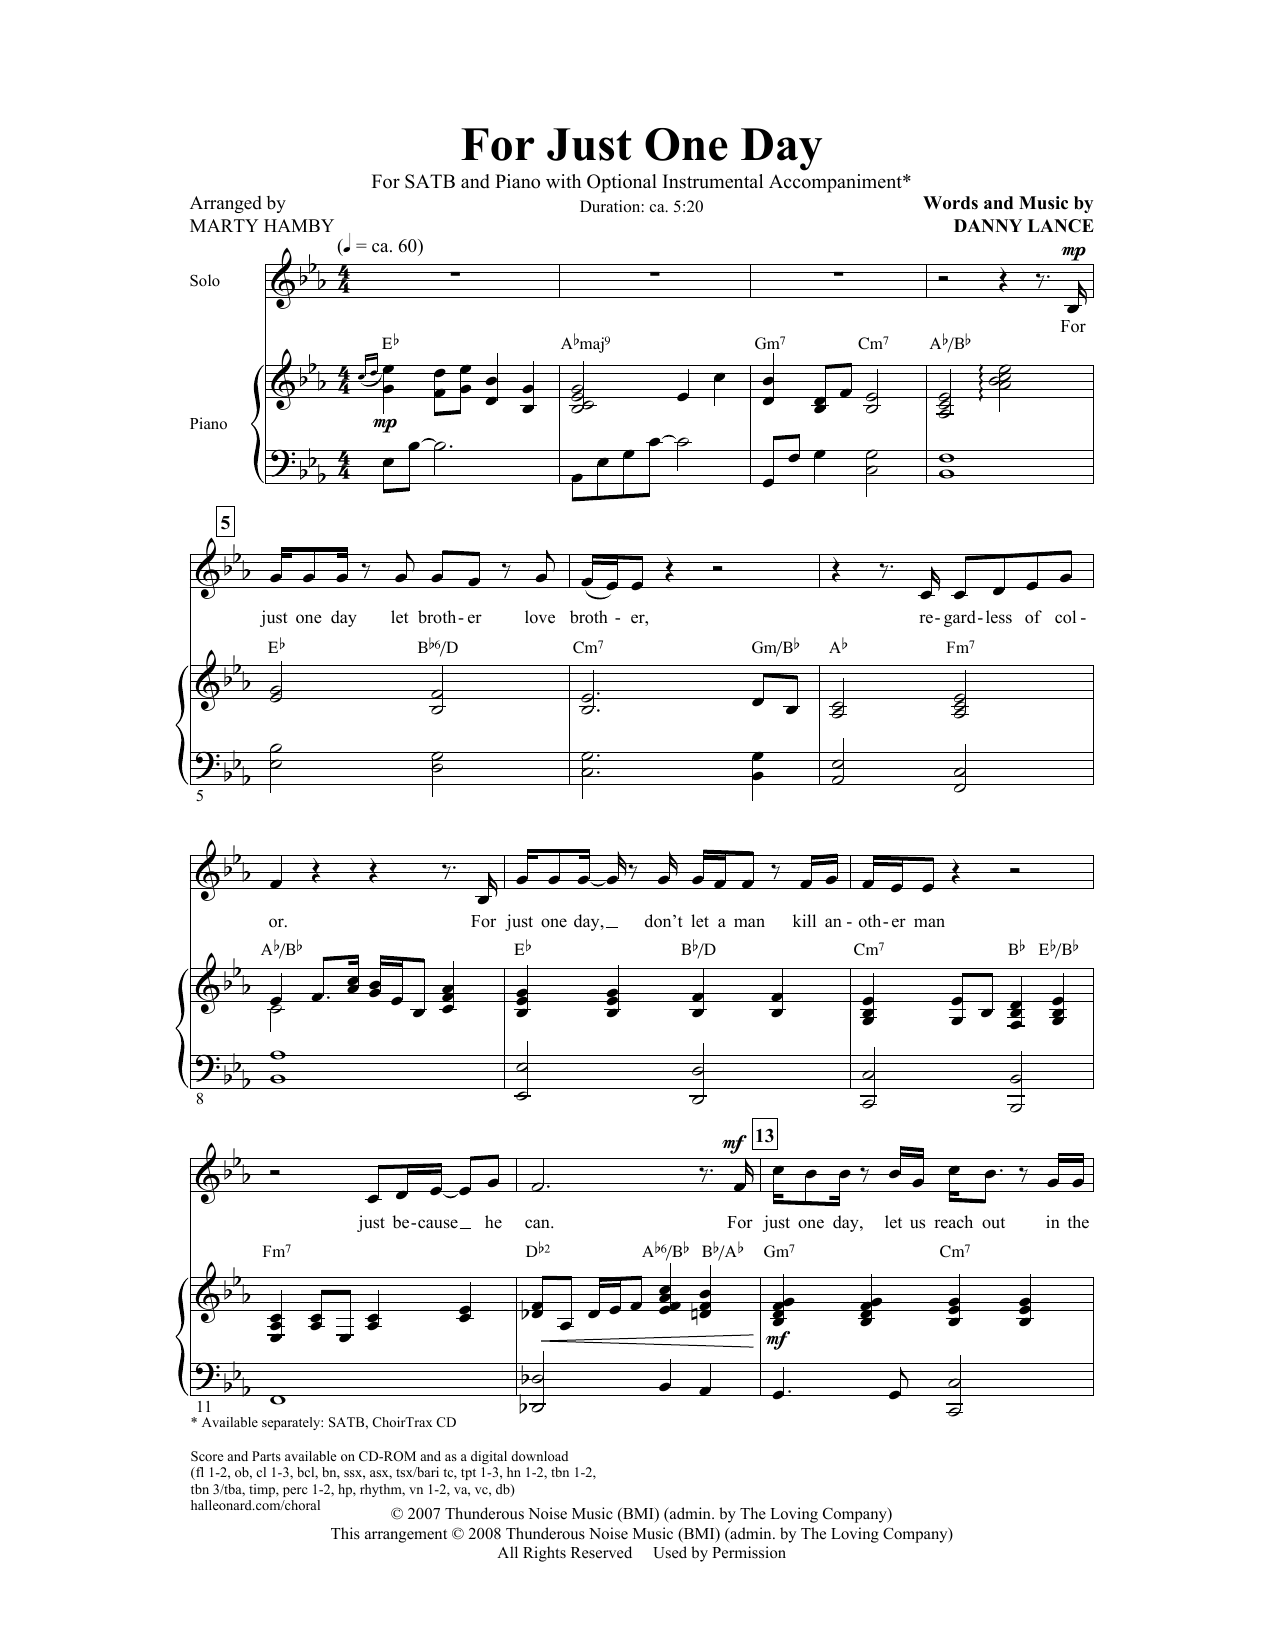 Download Danny Lance For Just One Day (arr. Marty Hamby) Sheet Music